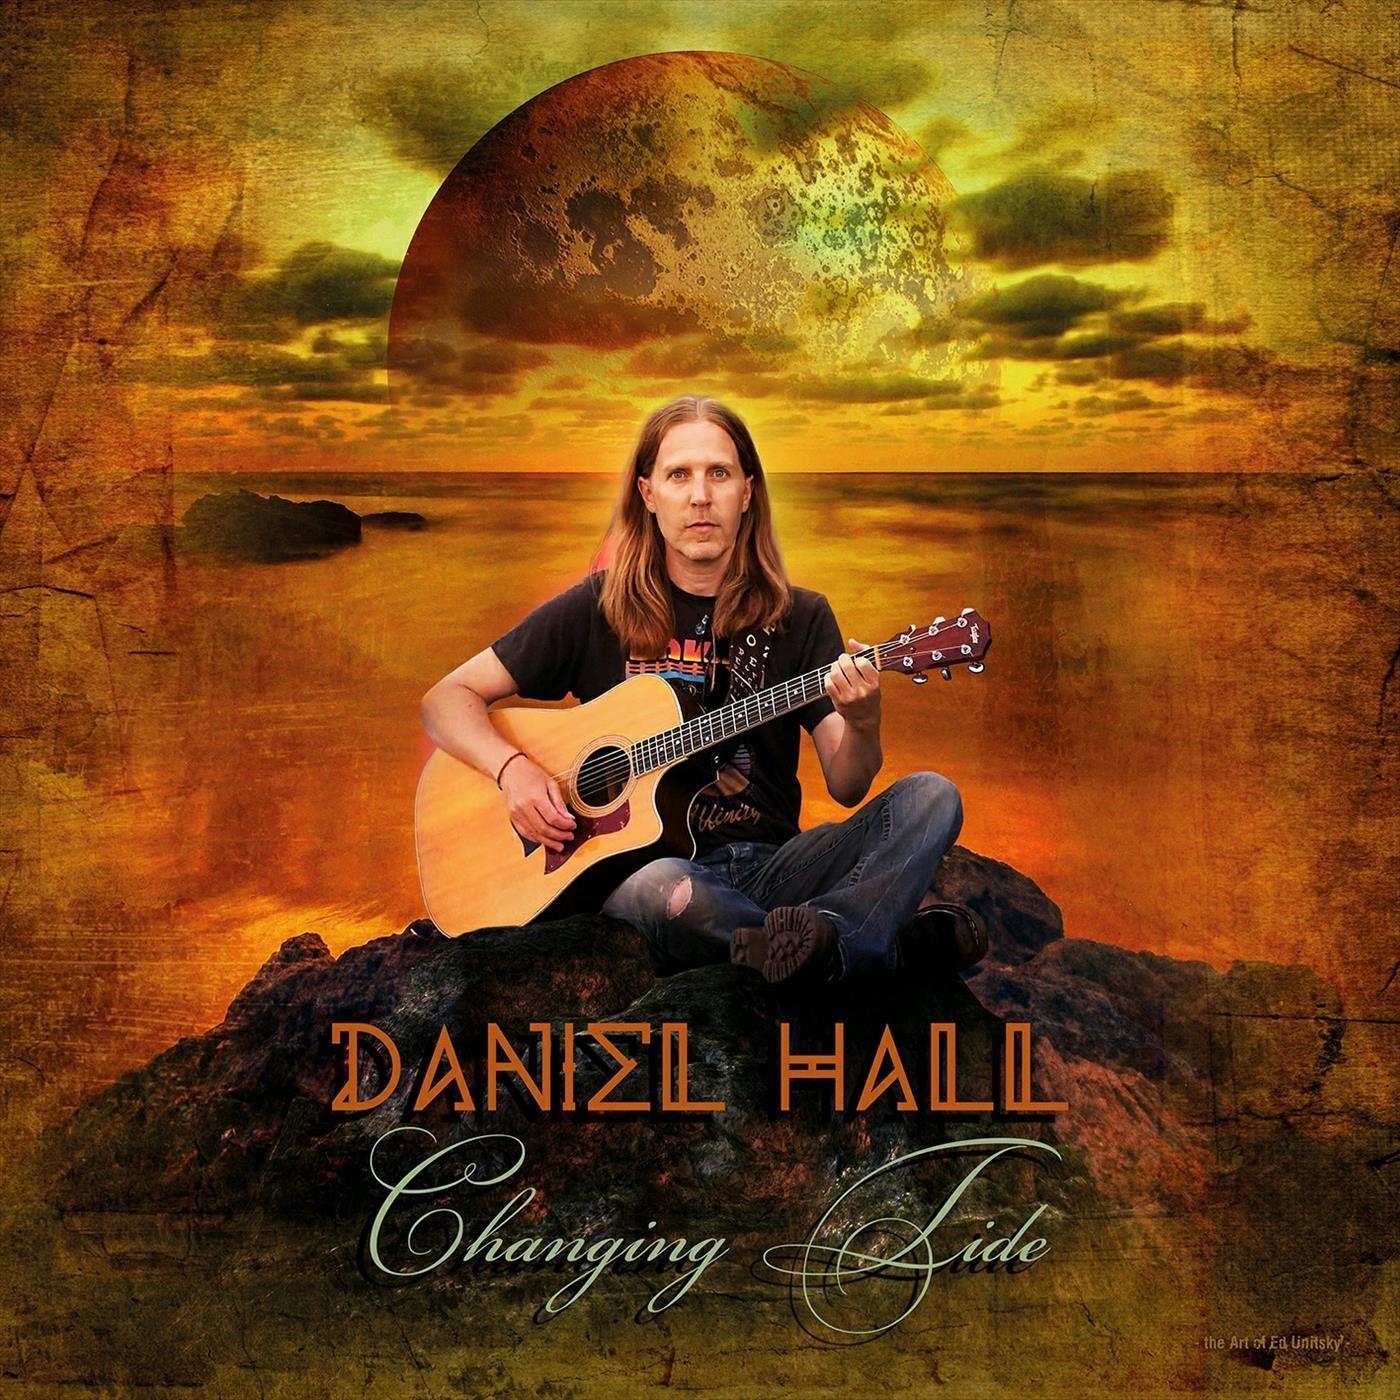 Daniel Hall - Back to the Beginning